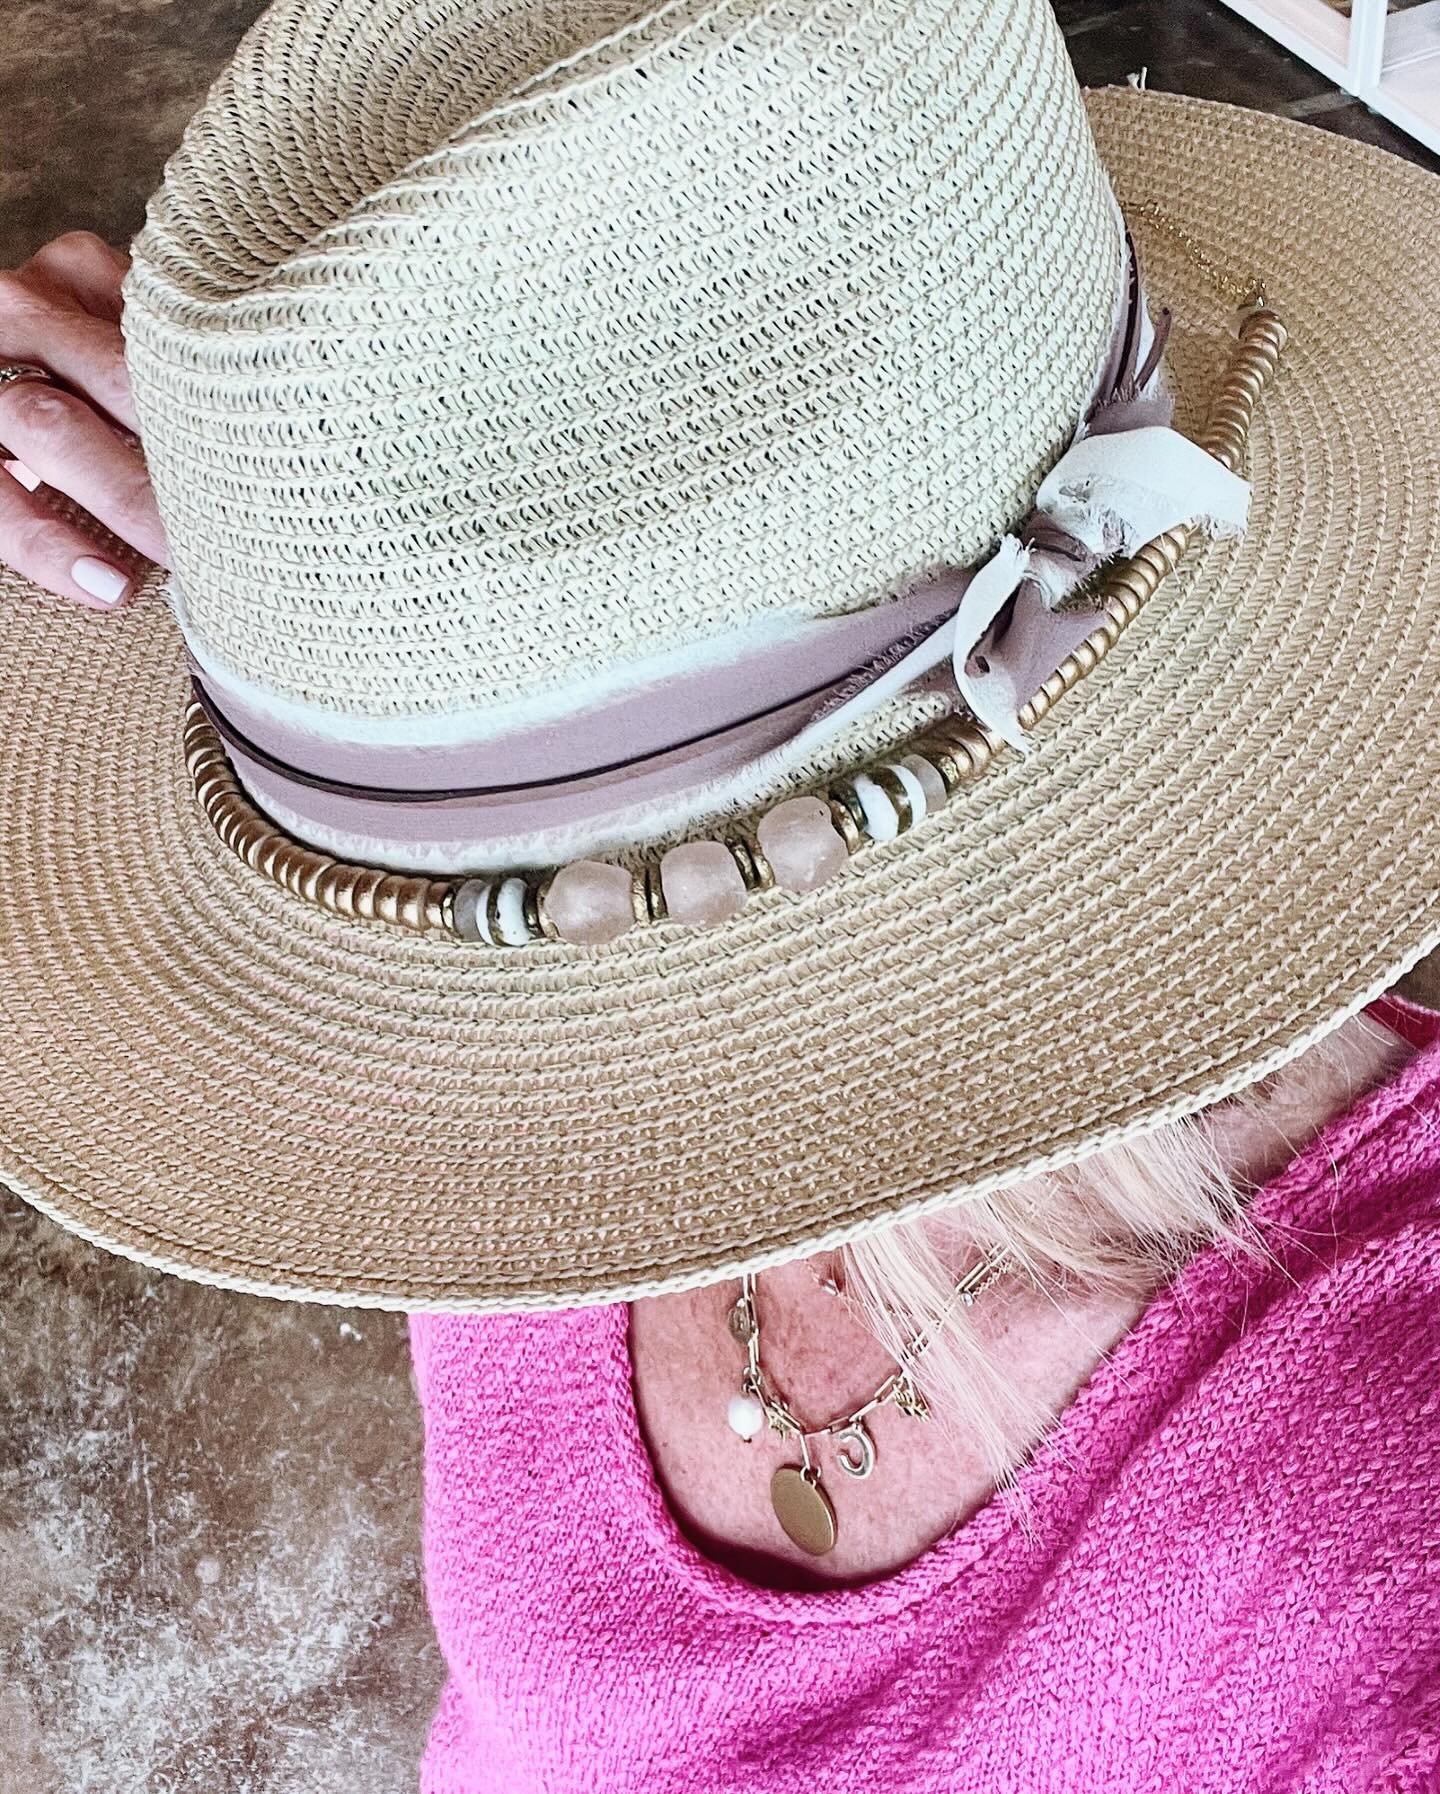 Summer hats are here!! 👒Join us to create your custom hat on May 29th at 7pm. You&rsquo;ll choose your hat color, then you&rsquo;ll choose ribbons, and make a beaded &ldquo;hat necklace&rdquo; to go around the base. 😜

Who&rsquo;s in?! Comment &ldq